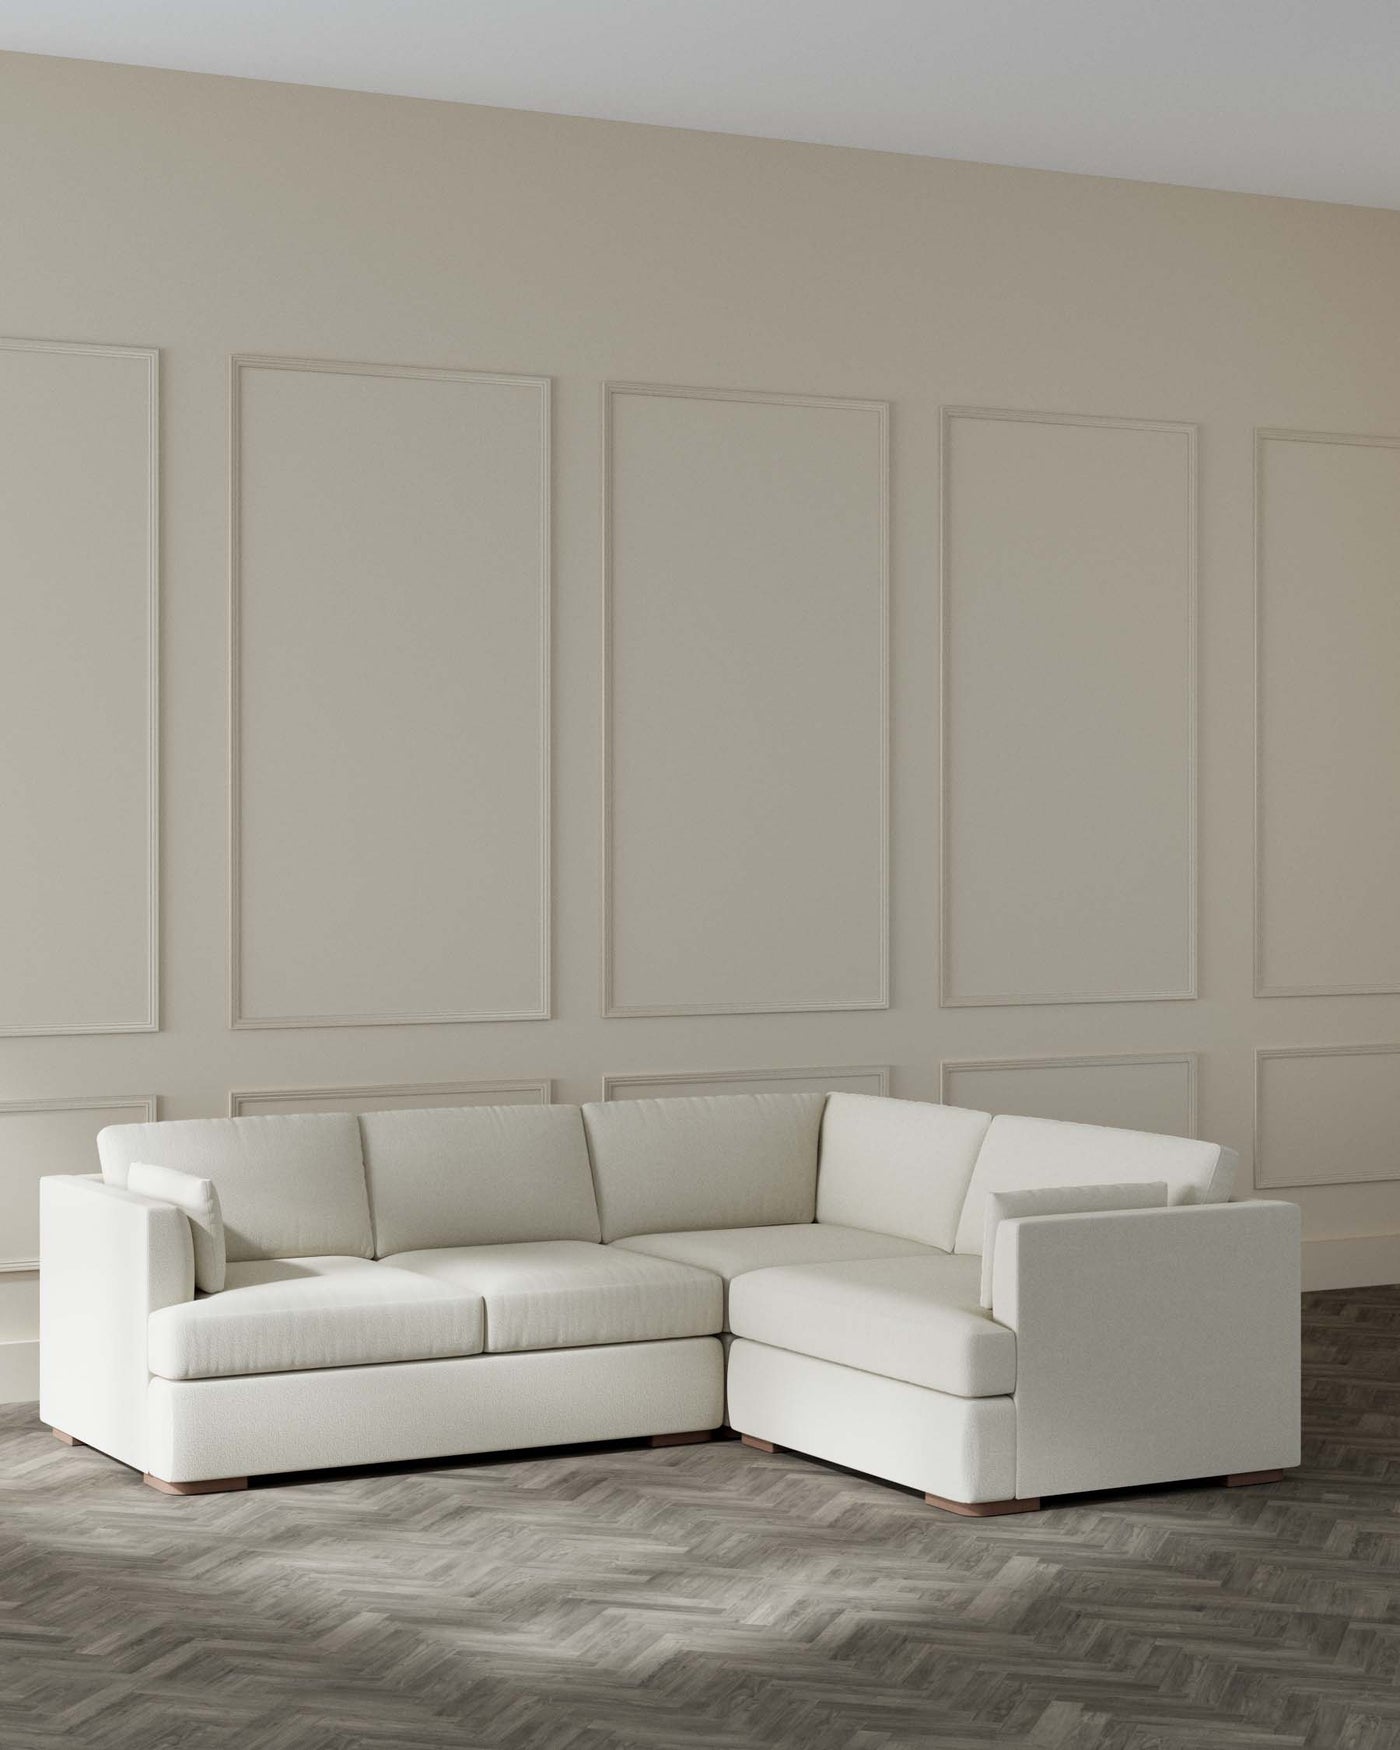 L-shaped modern sectional sofa with a clean, minimalist design, upholstered in light beige fabric, featuring plush cushions and a low-rise back, set on a wood herringbone pattern floor against a panelled wall.